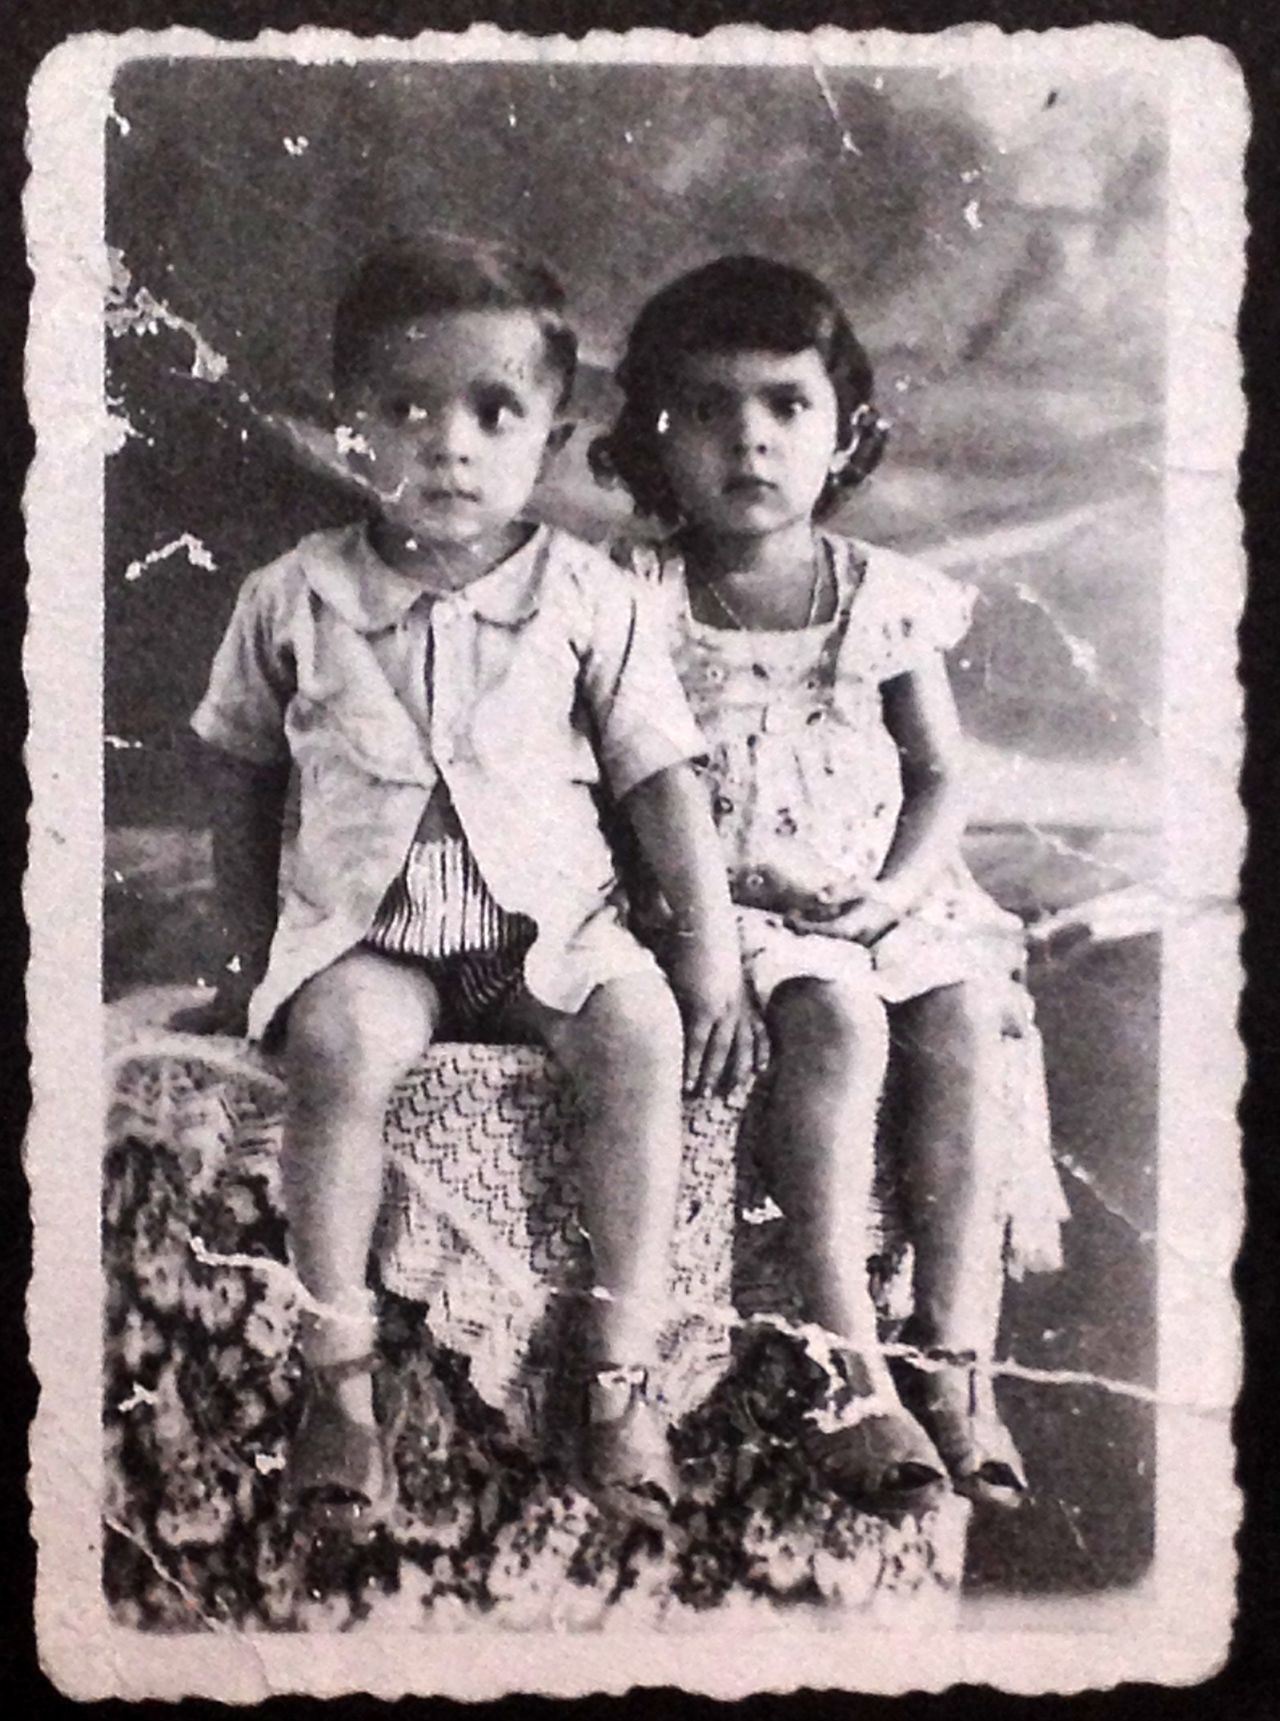 Lula sits for a picture with his sister in 1949.